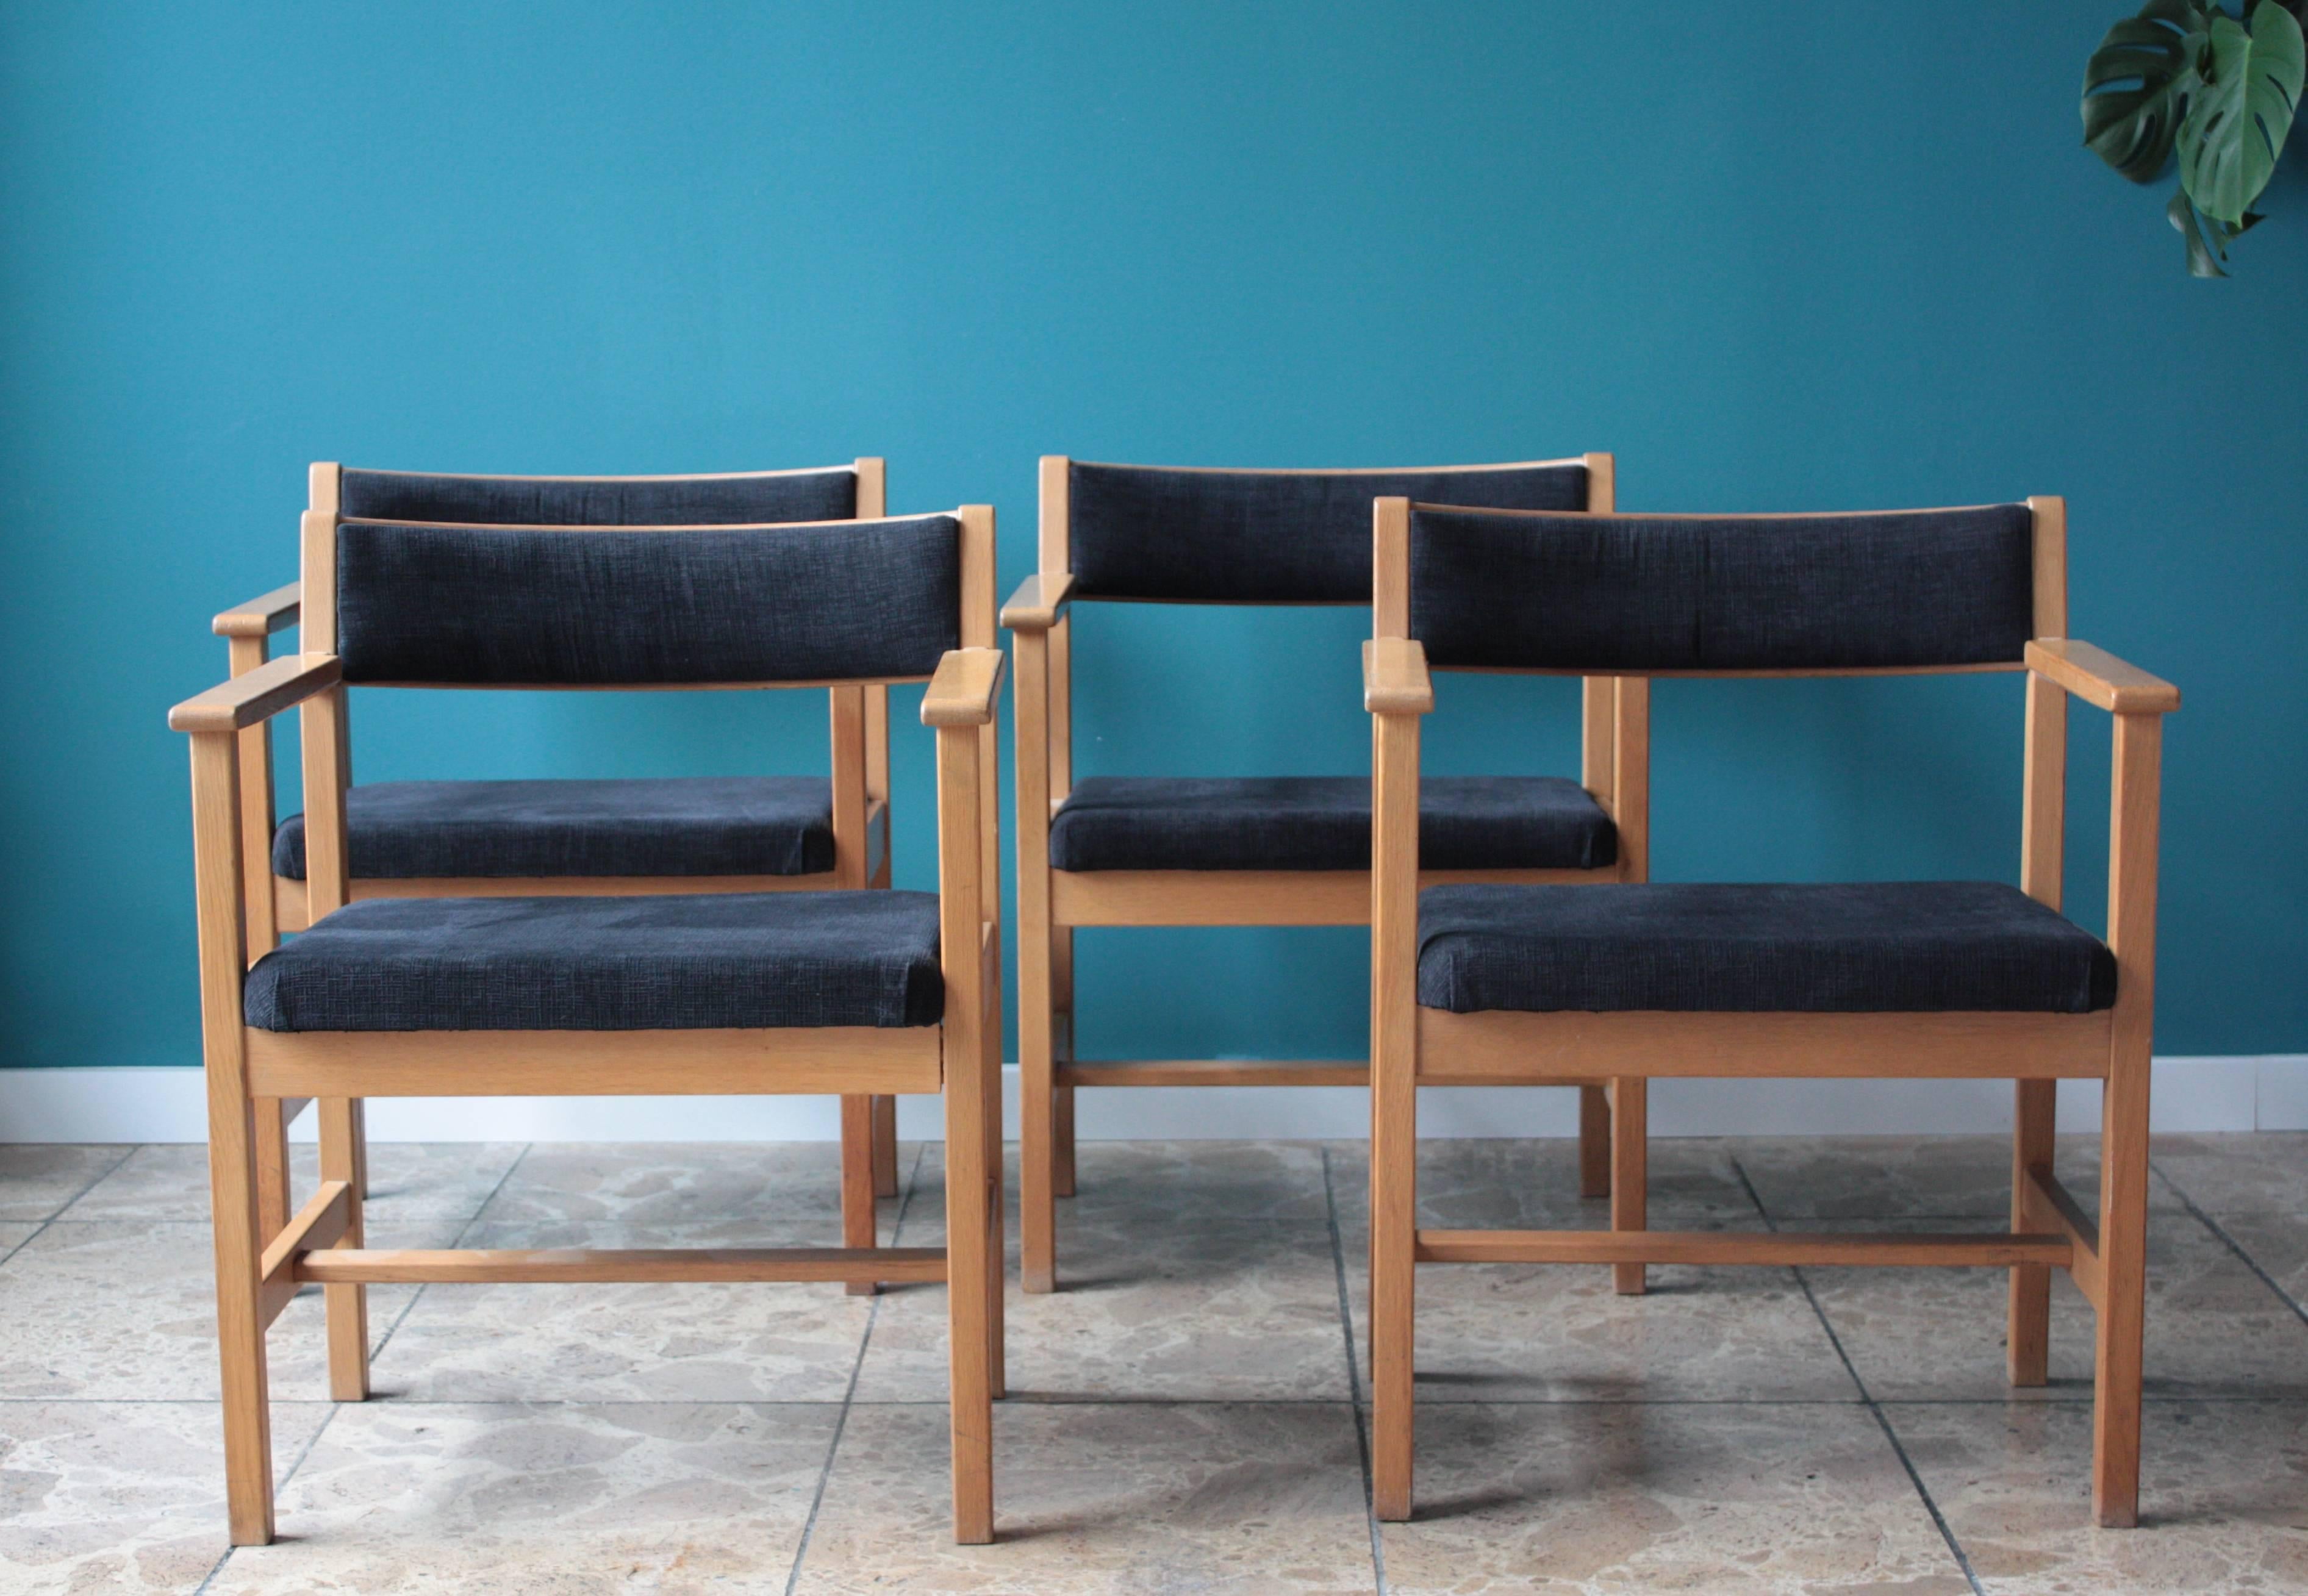 This set of four dining chairs model 3242 was designed by Børge Mogensen and produced by Fredericia in Denmark. They feature oak frames and a dark blue upholstery.